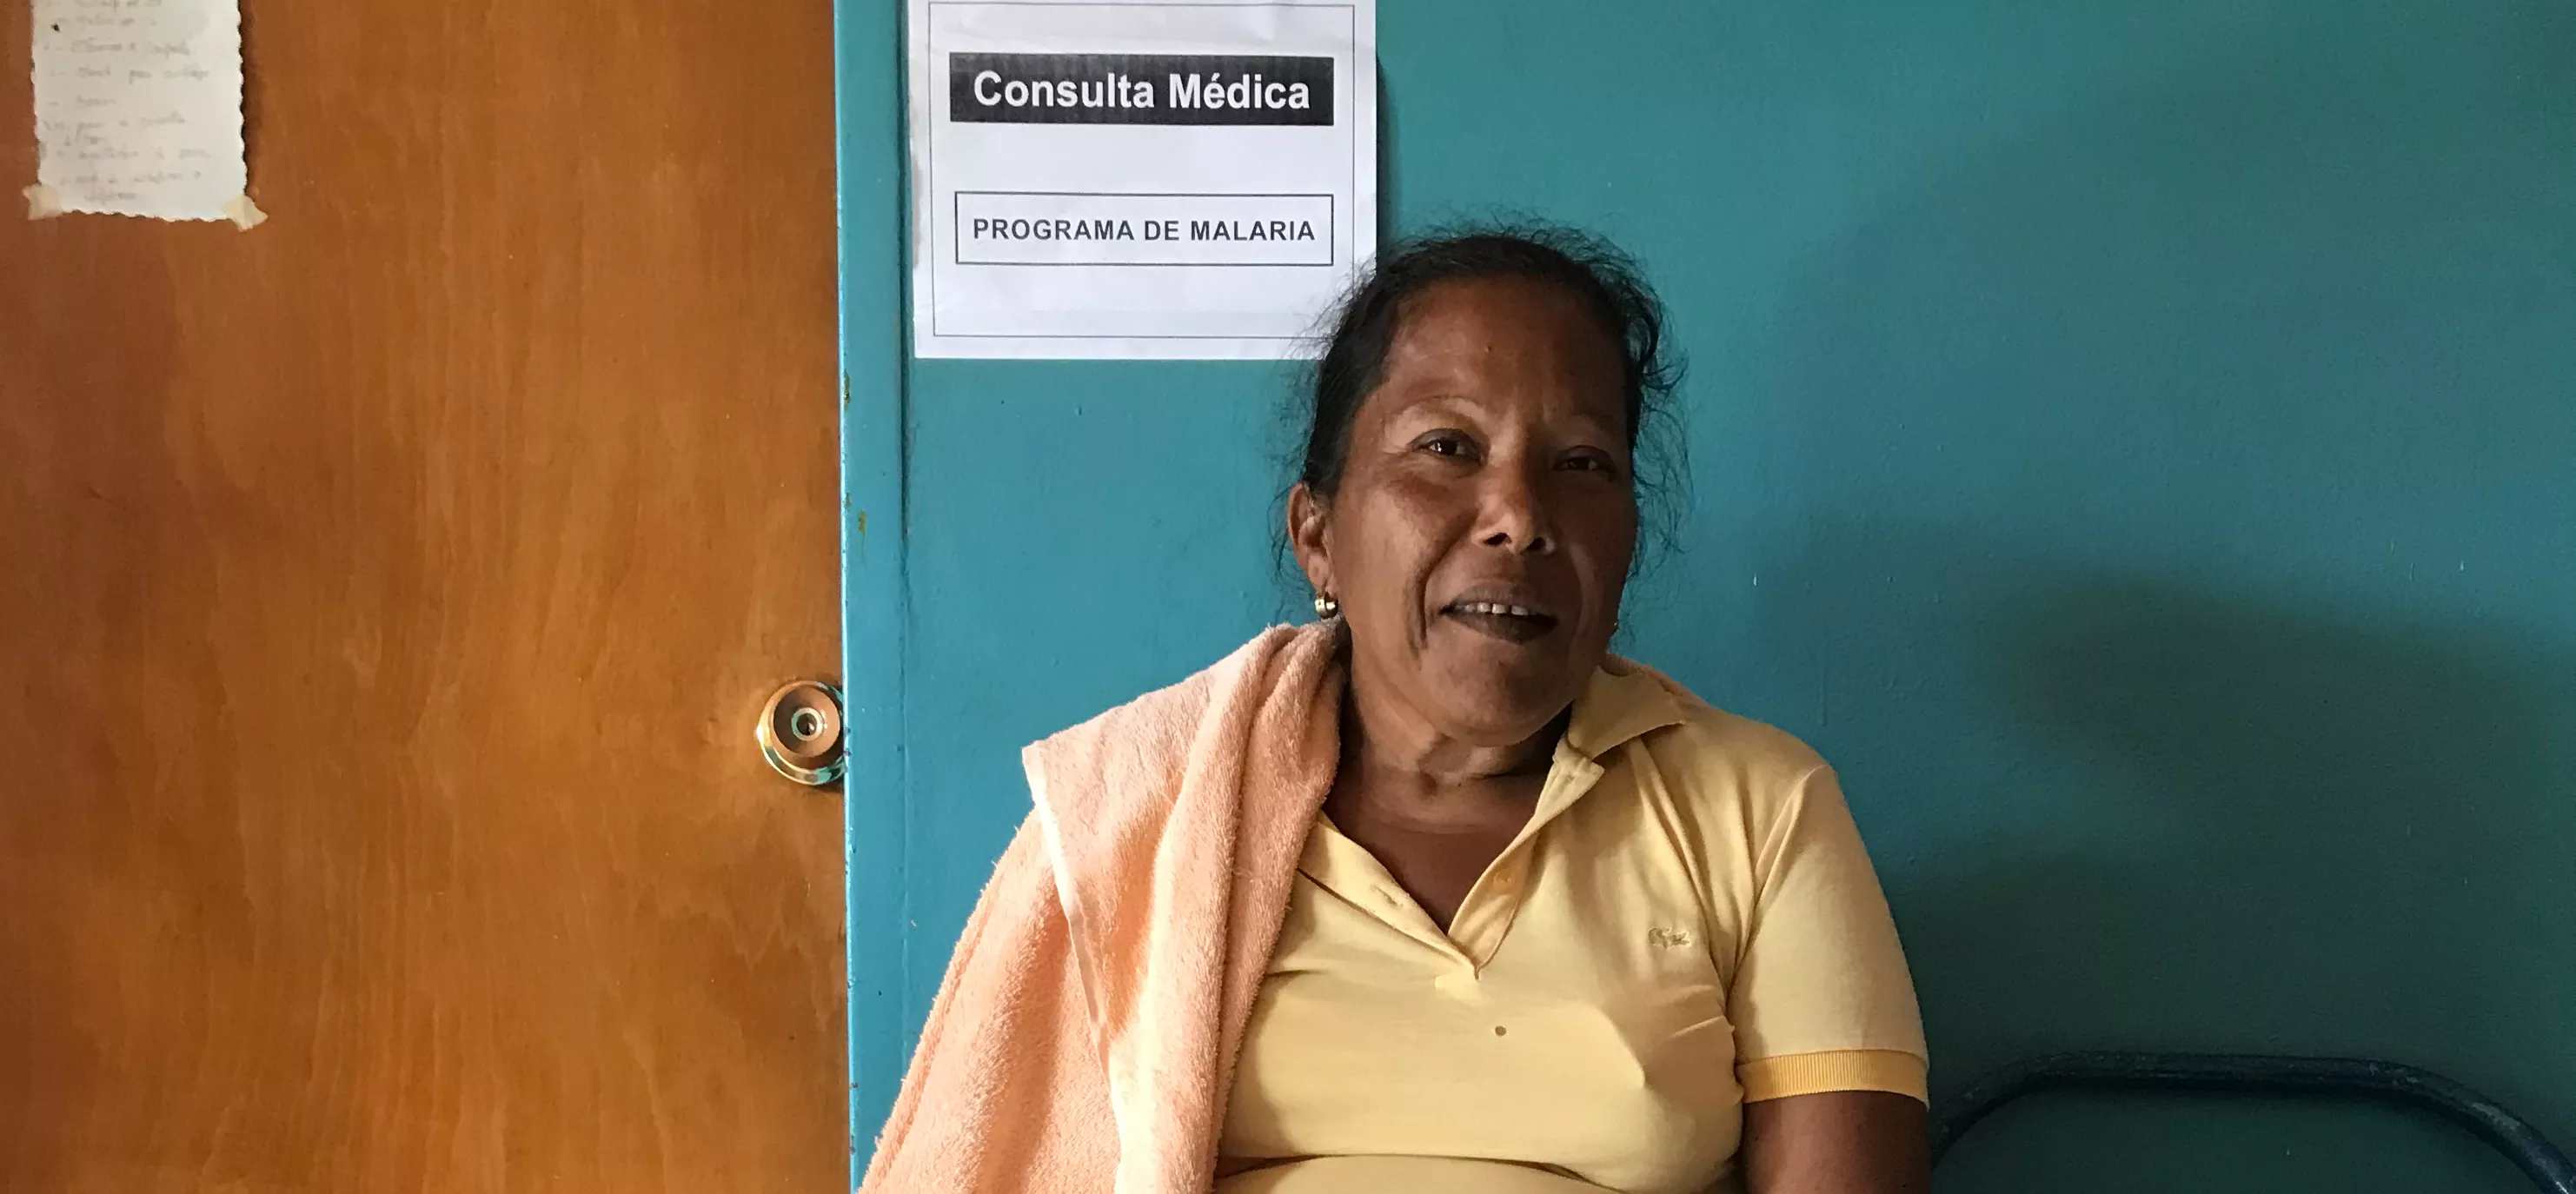 Rupilia Martínez is 48-years-old and lives in San Miguel, about 30 minutes from San Vicente clinic. She works in agriculture and has had malaria three times.